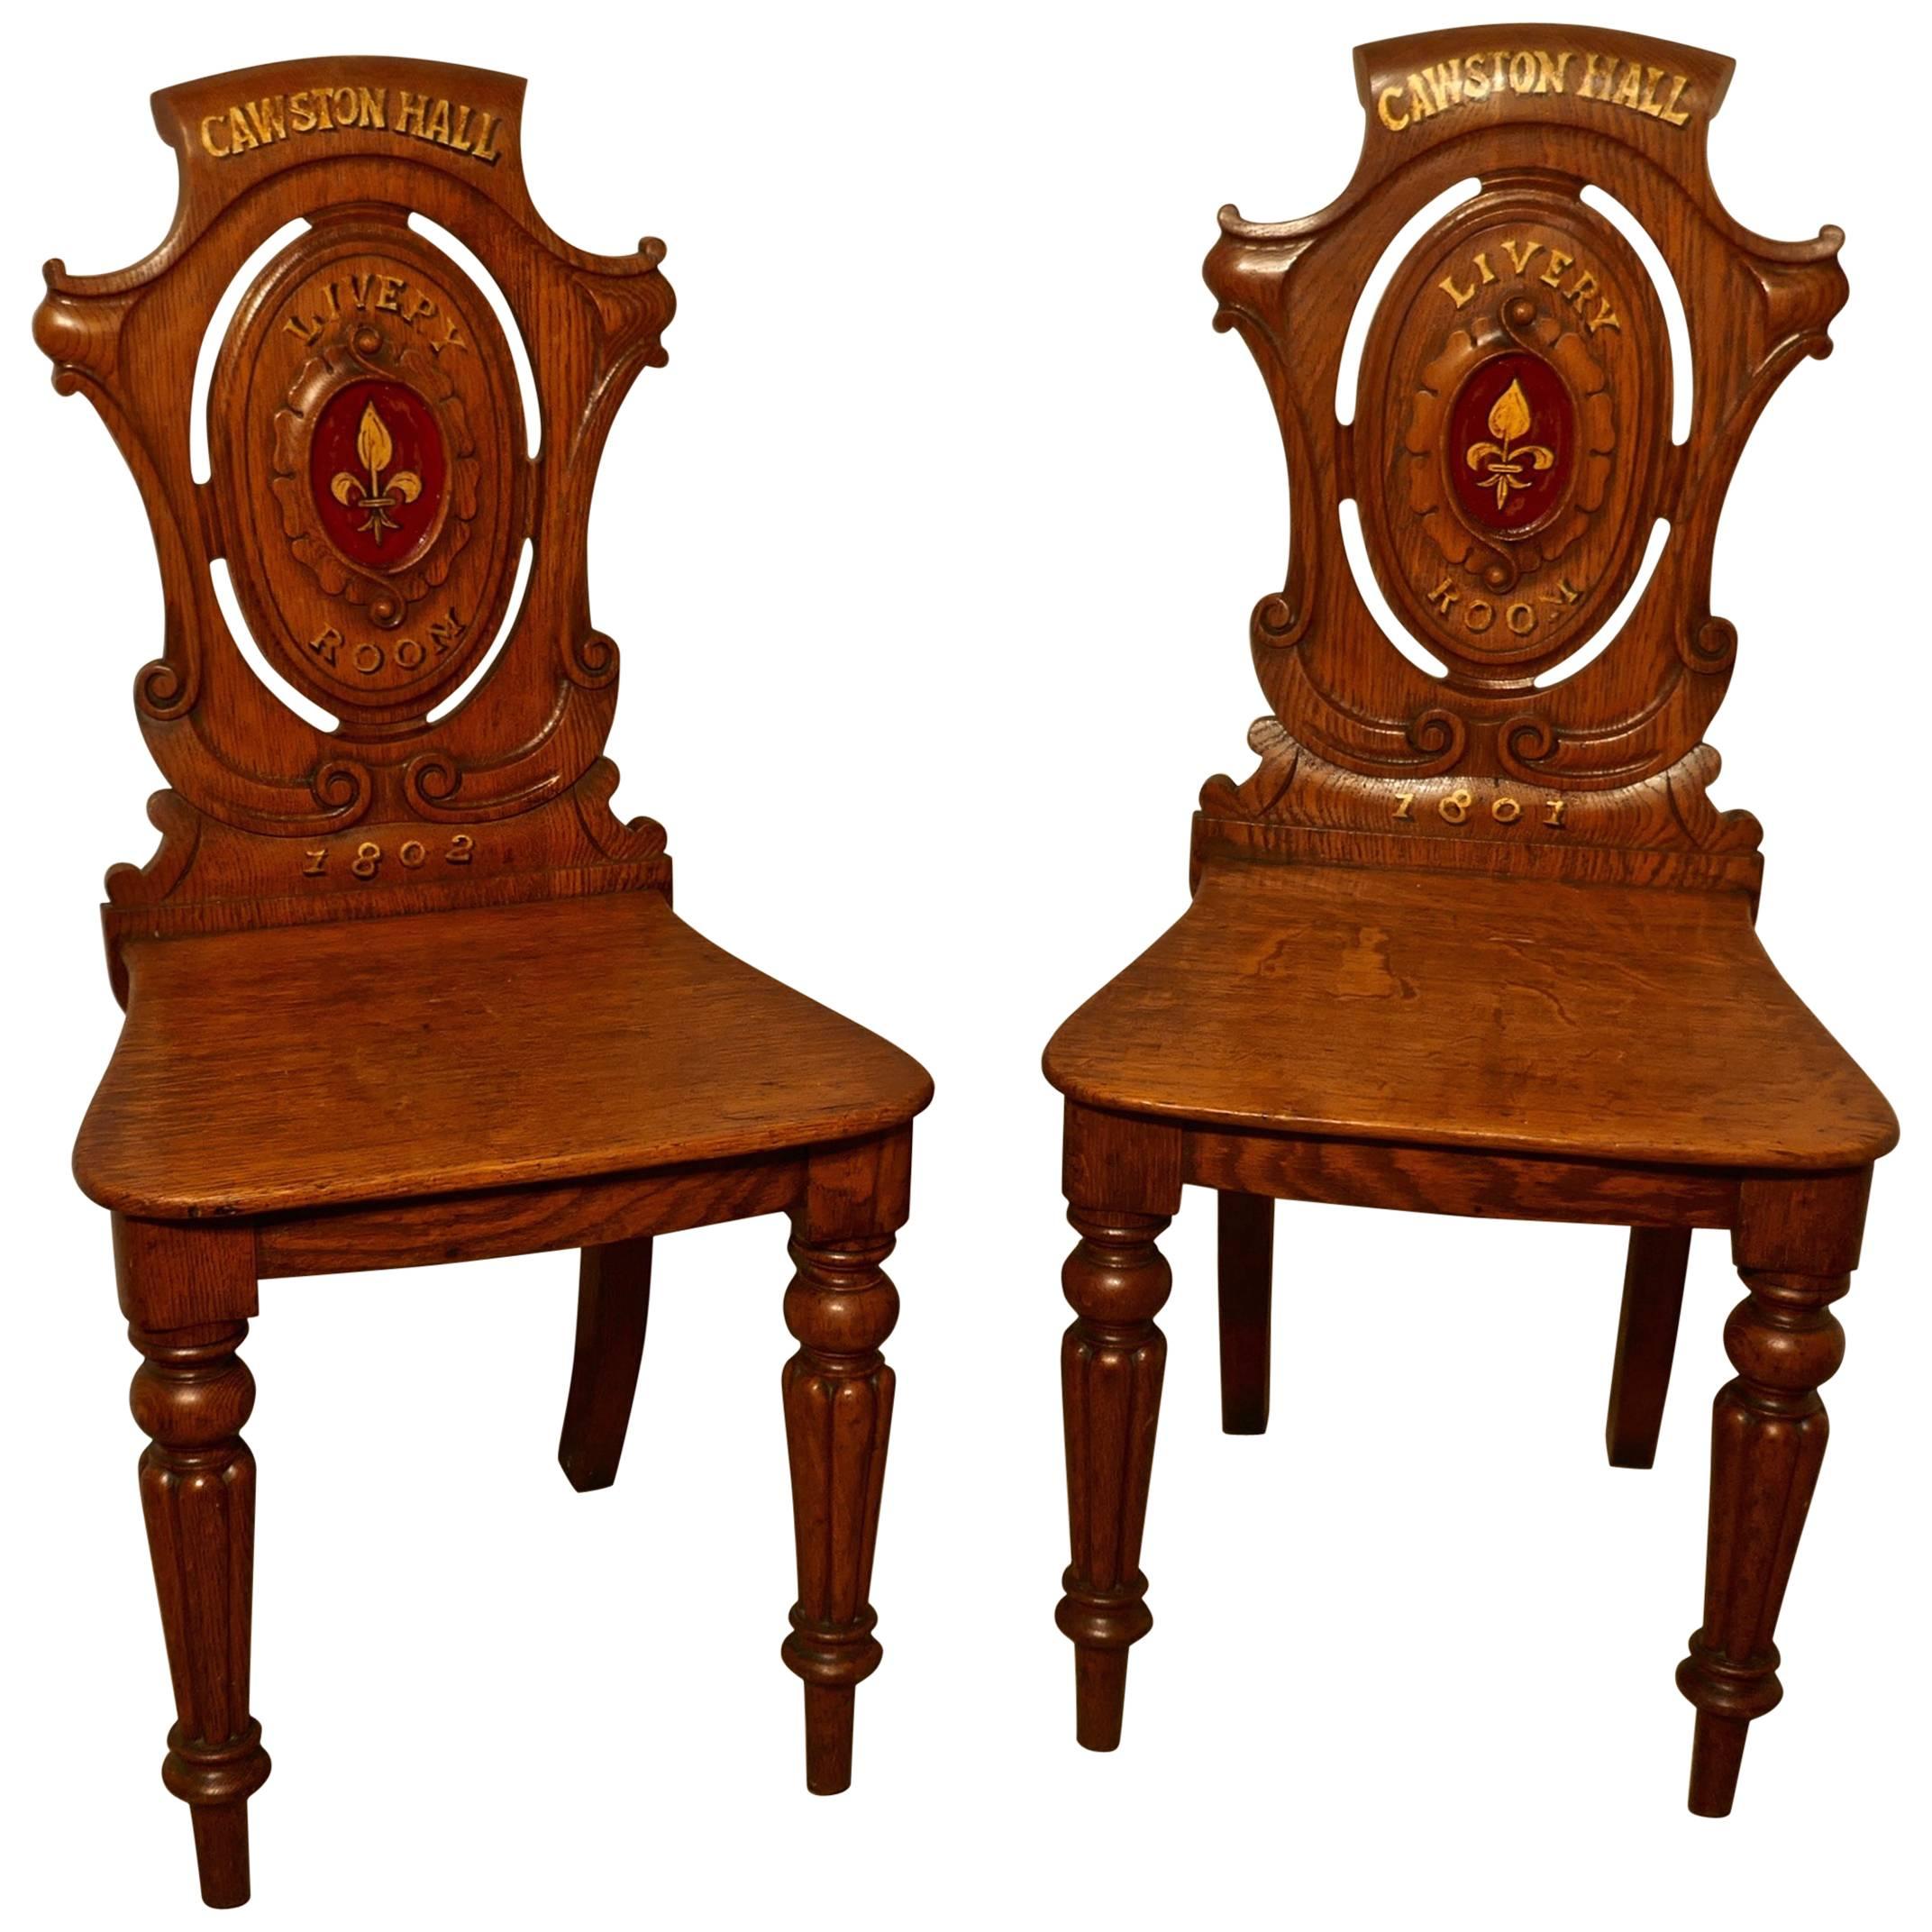 Early 19th Century Golden Oak Hall Chairs, from Cawston Hall Livery Room